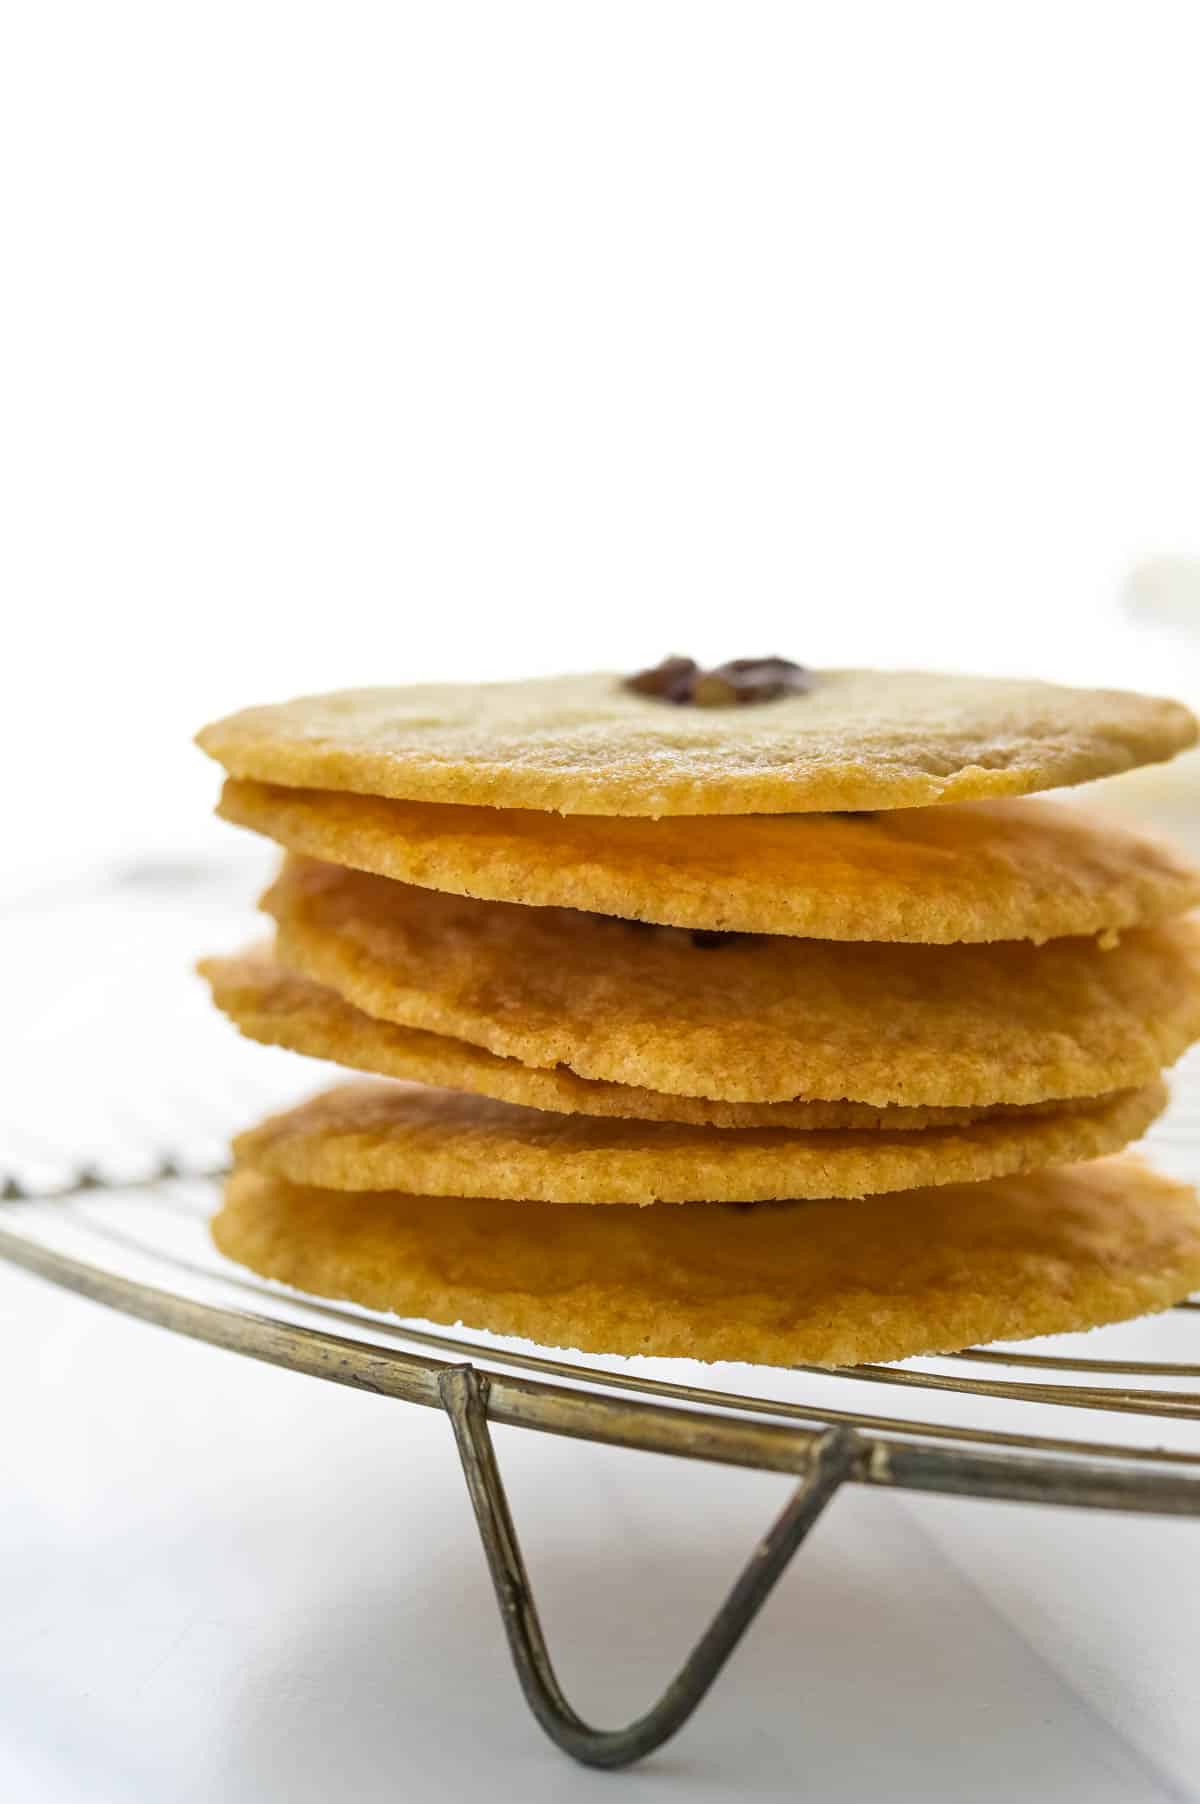 A stack of 6 crispy sugar cookies to show how thin they are.